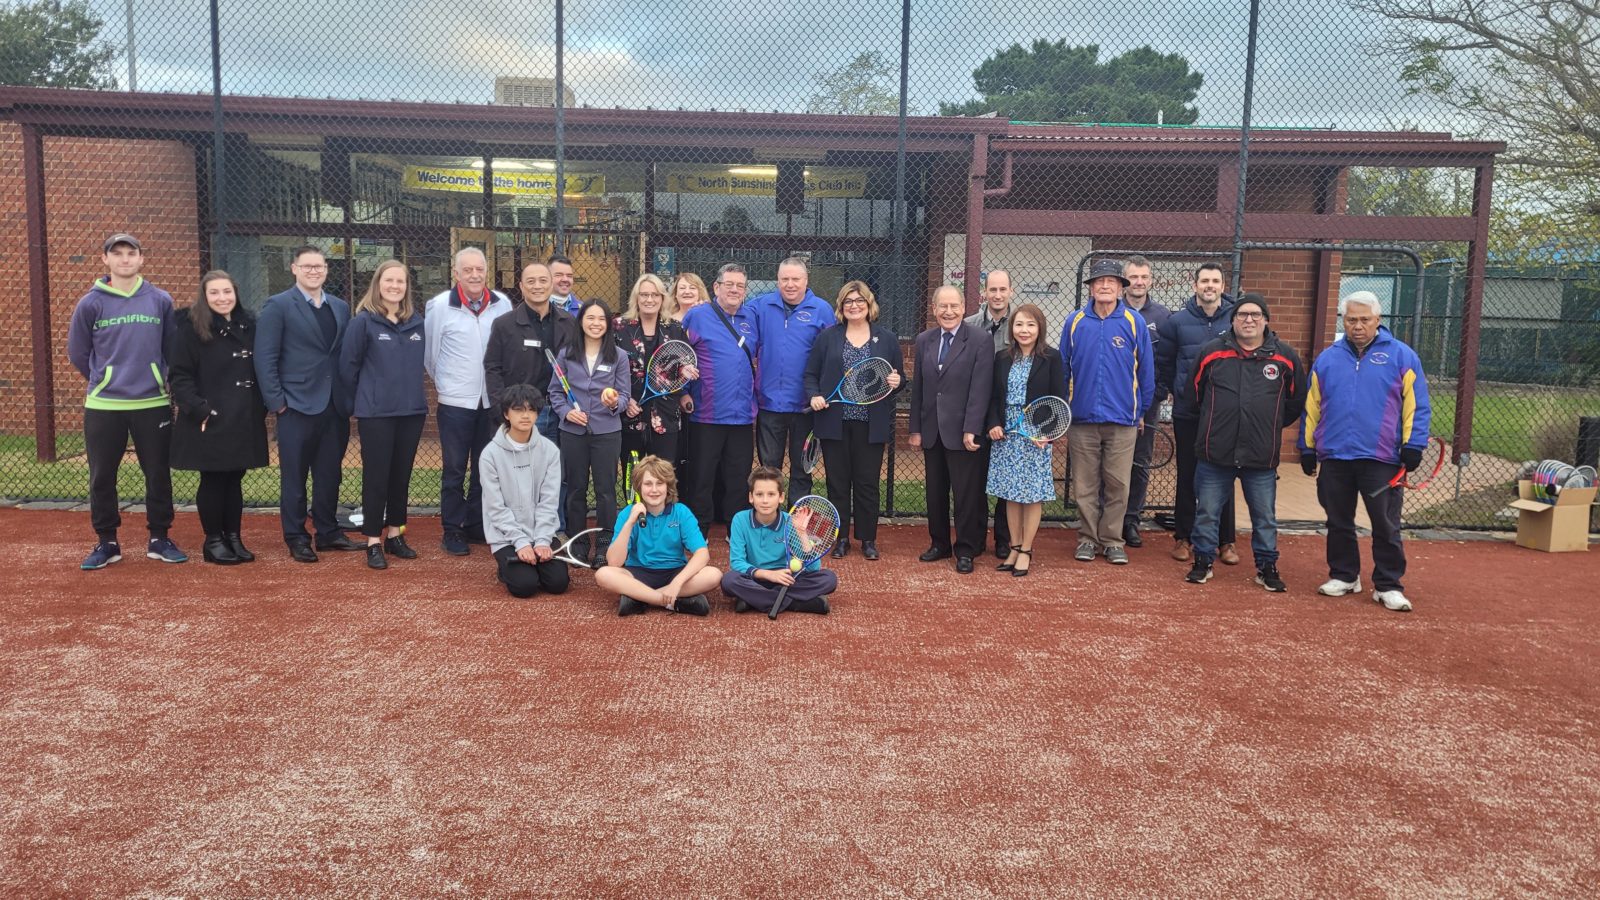 Minister for Community Sport Ros Spence, Brimbank Mayor Cr Jasmine Nguyen and club members at Dempster Park Tennis.